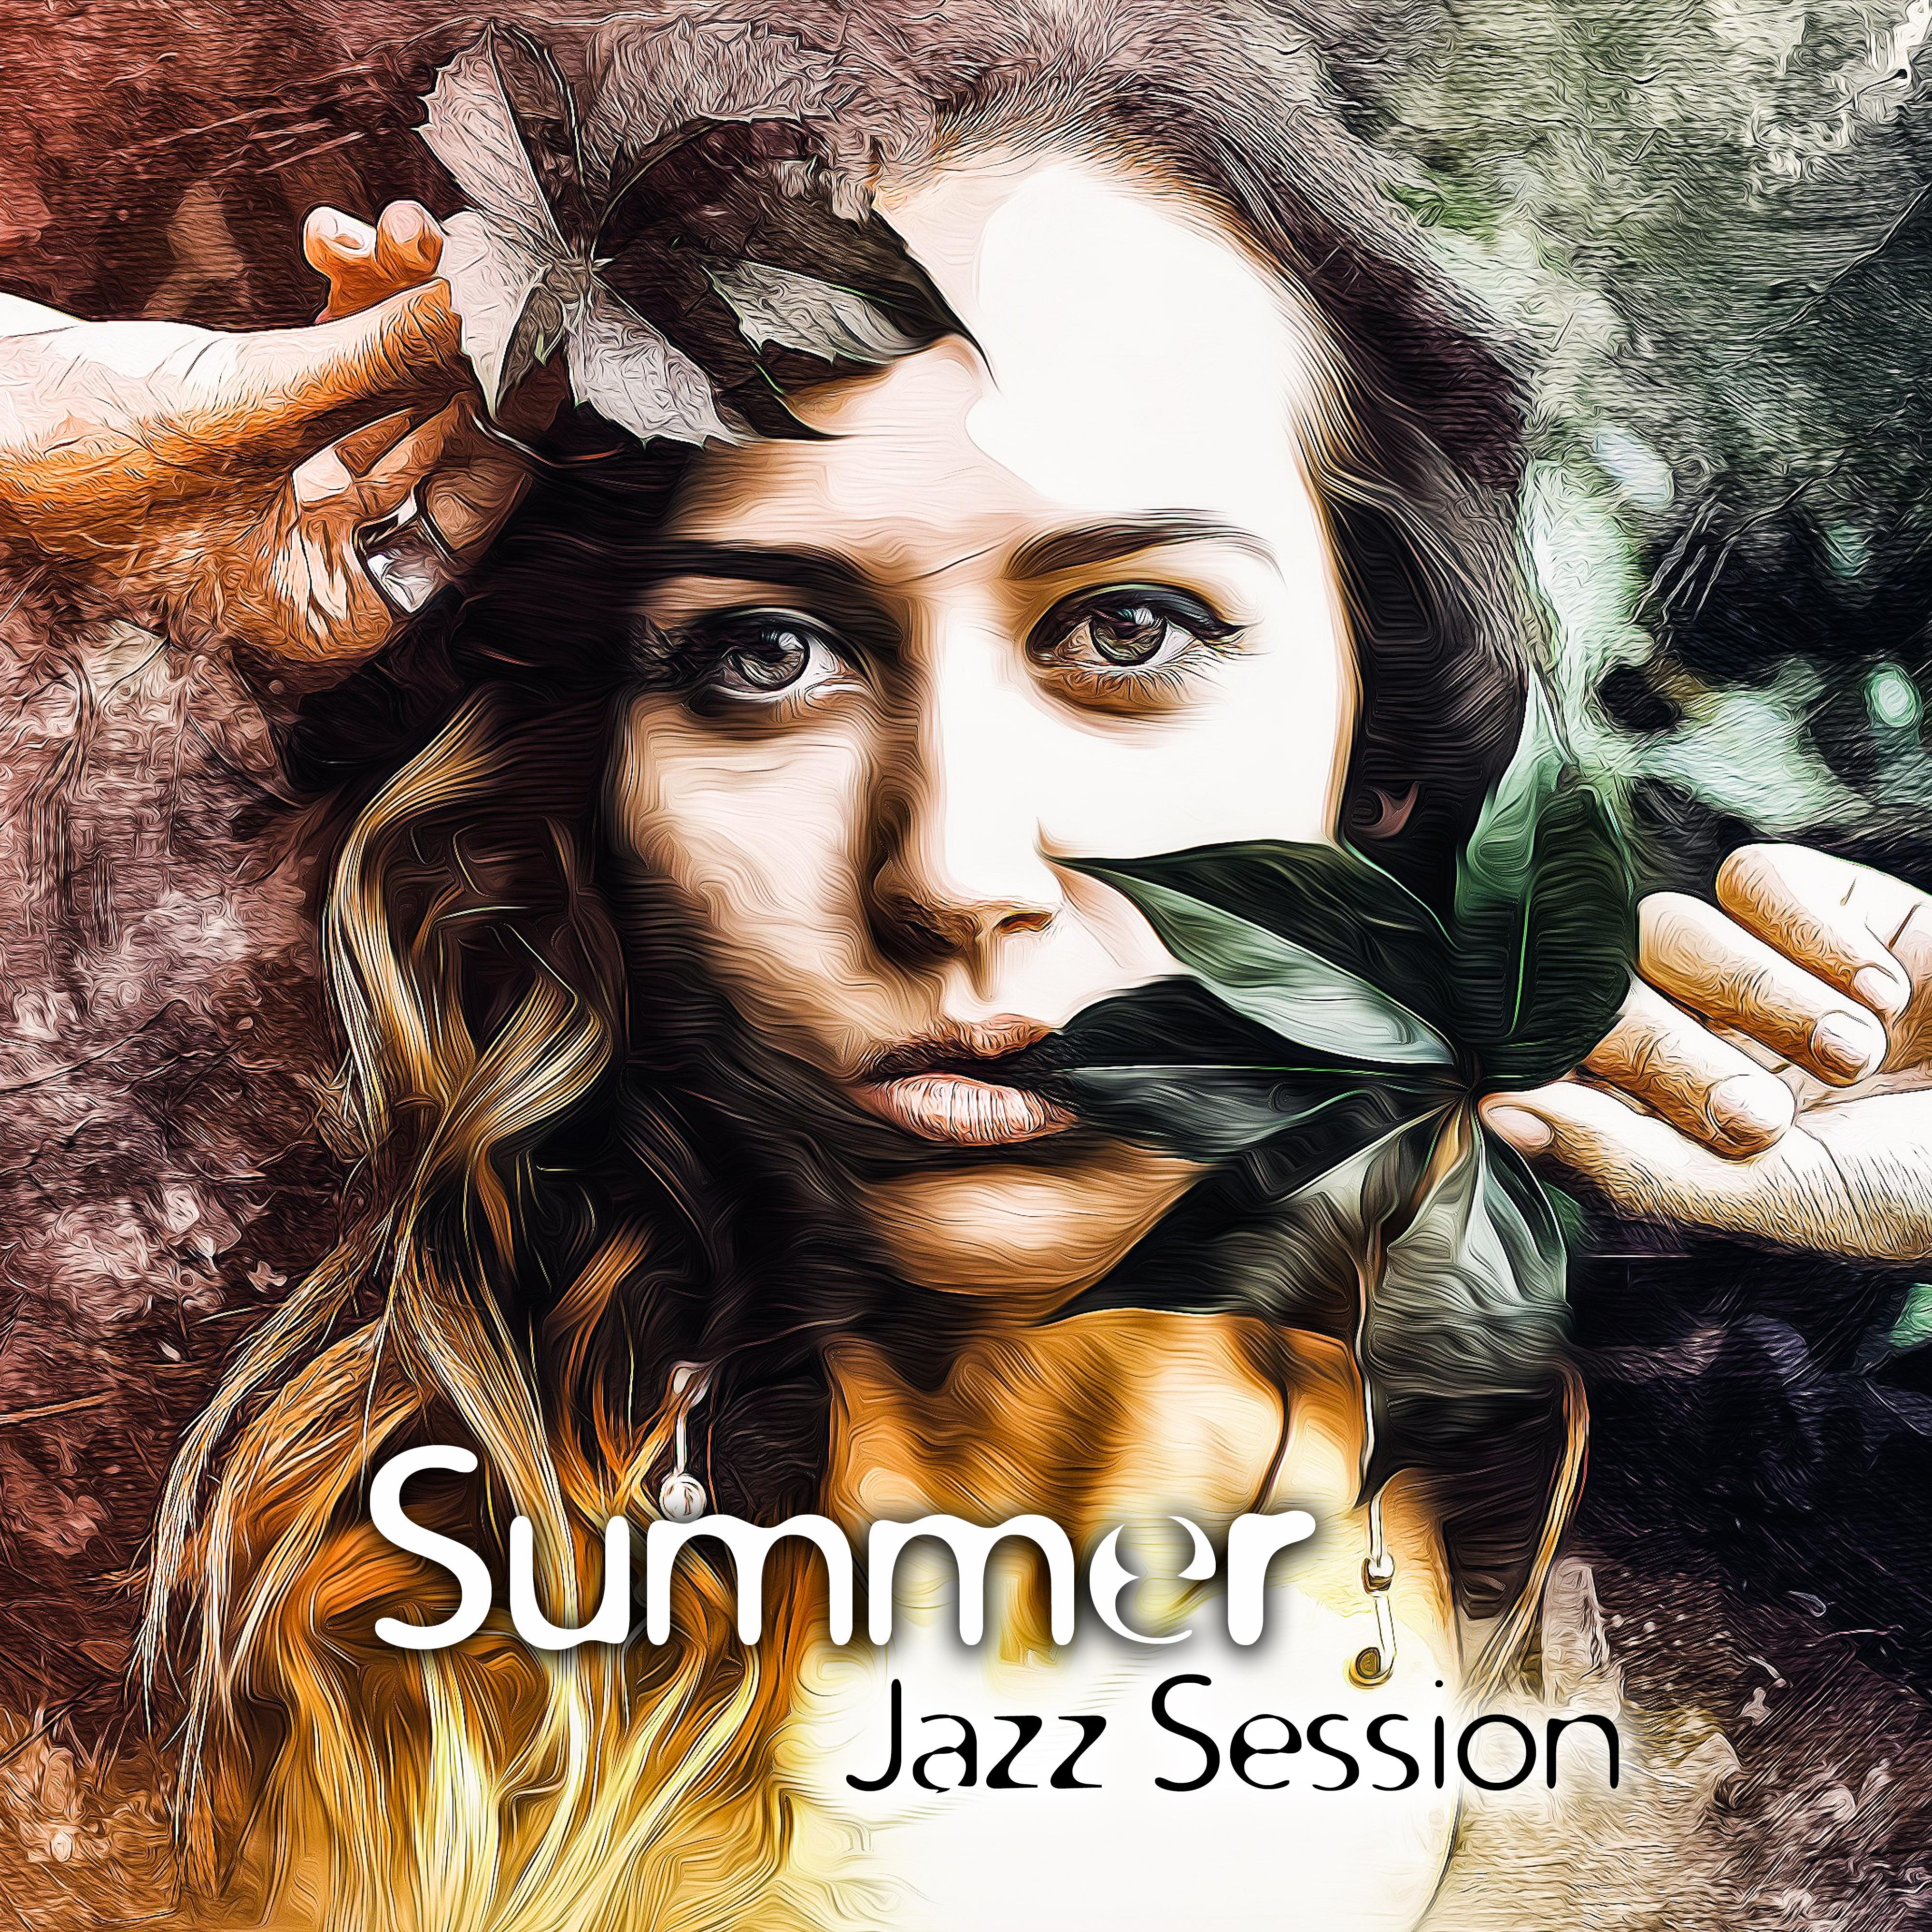 Summer Jazz Session – Summer Songs, Jazz Music, Relaxing Melodies, Chill Lounge Jazz, Instrumental